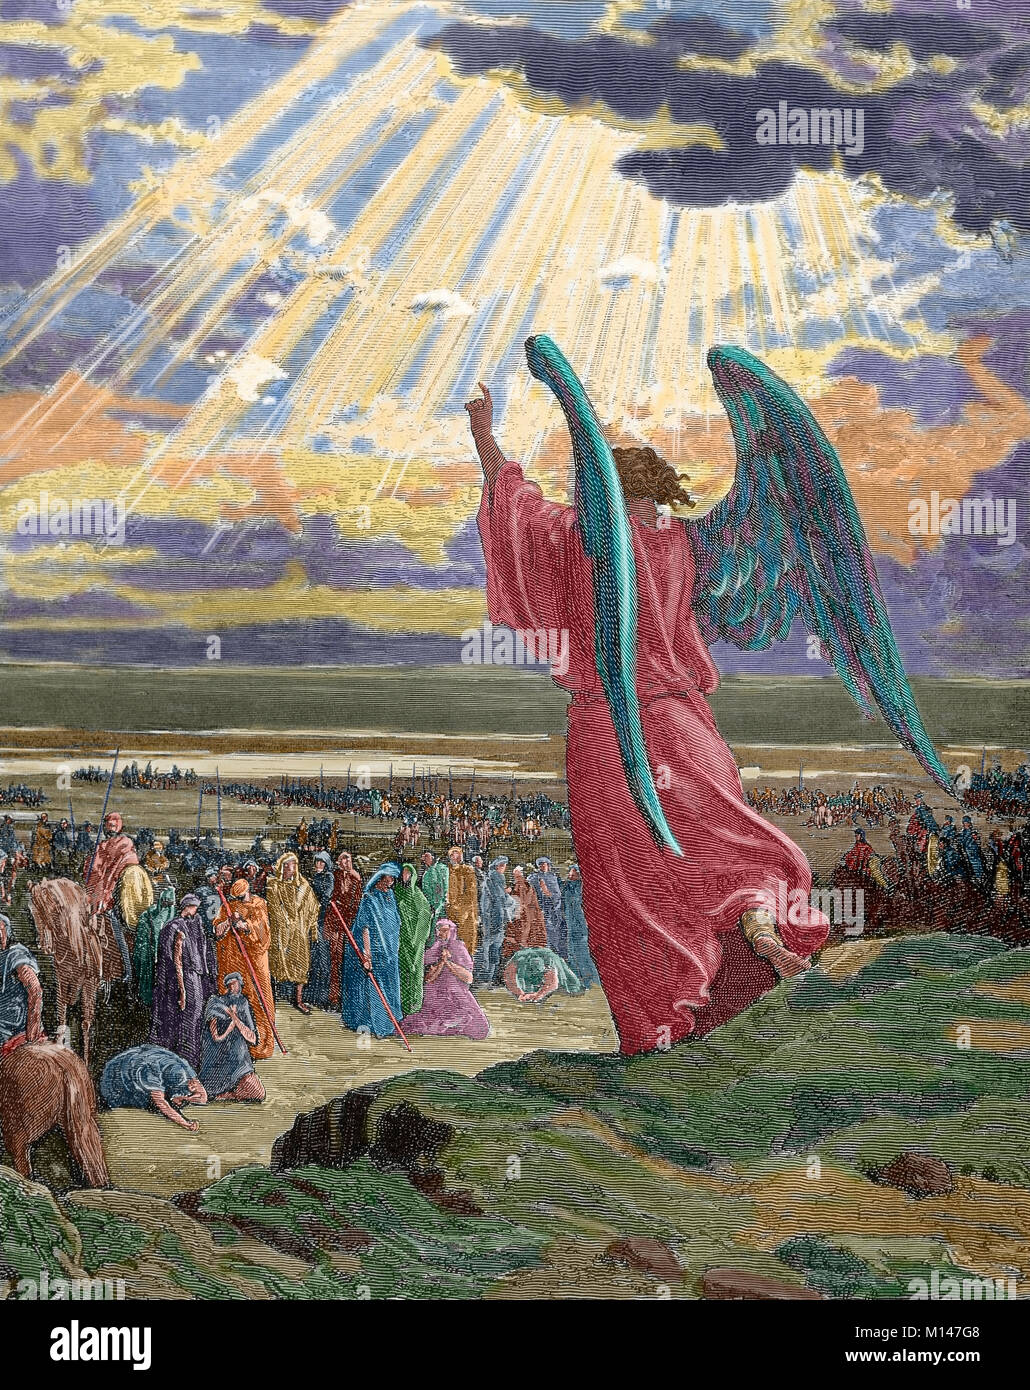 An angel appears Joshua's army. Book of Judges. Chapter 11, verses 1-5. Engraving by Gustave Dore (1832-1883). Colored. Stock Photo